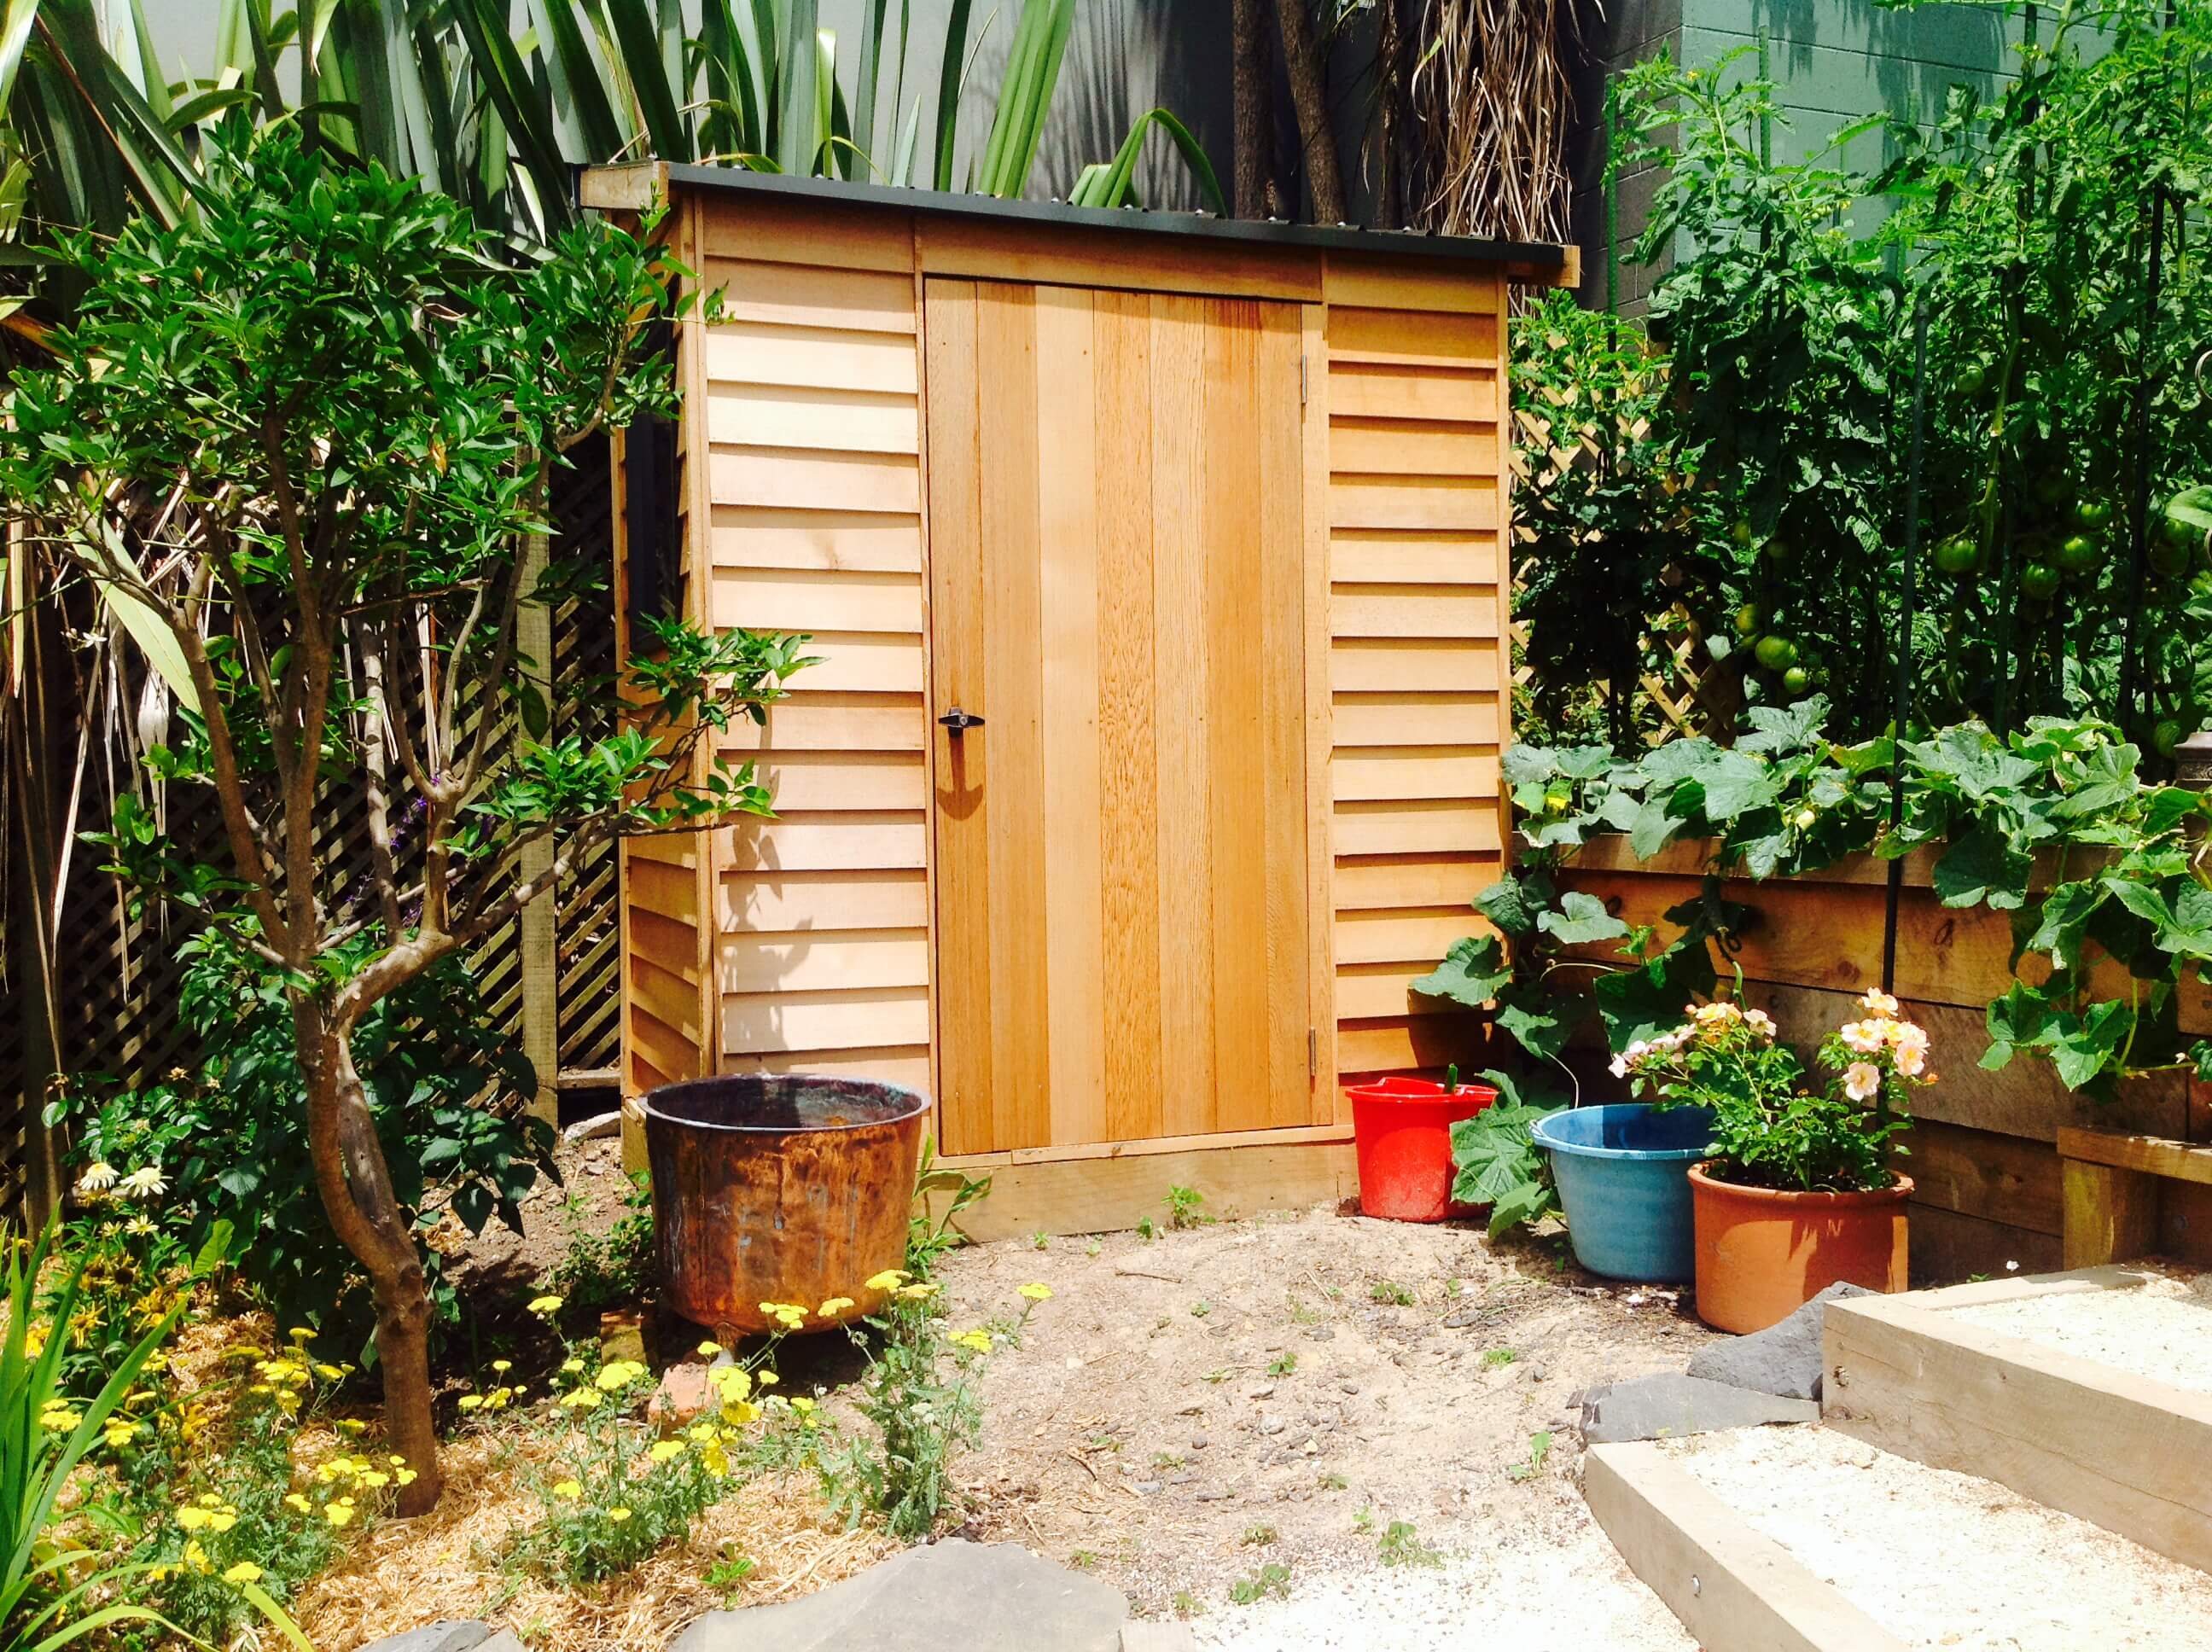 Sheds and Shelters - Garden Sheds and Garden Shelters